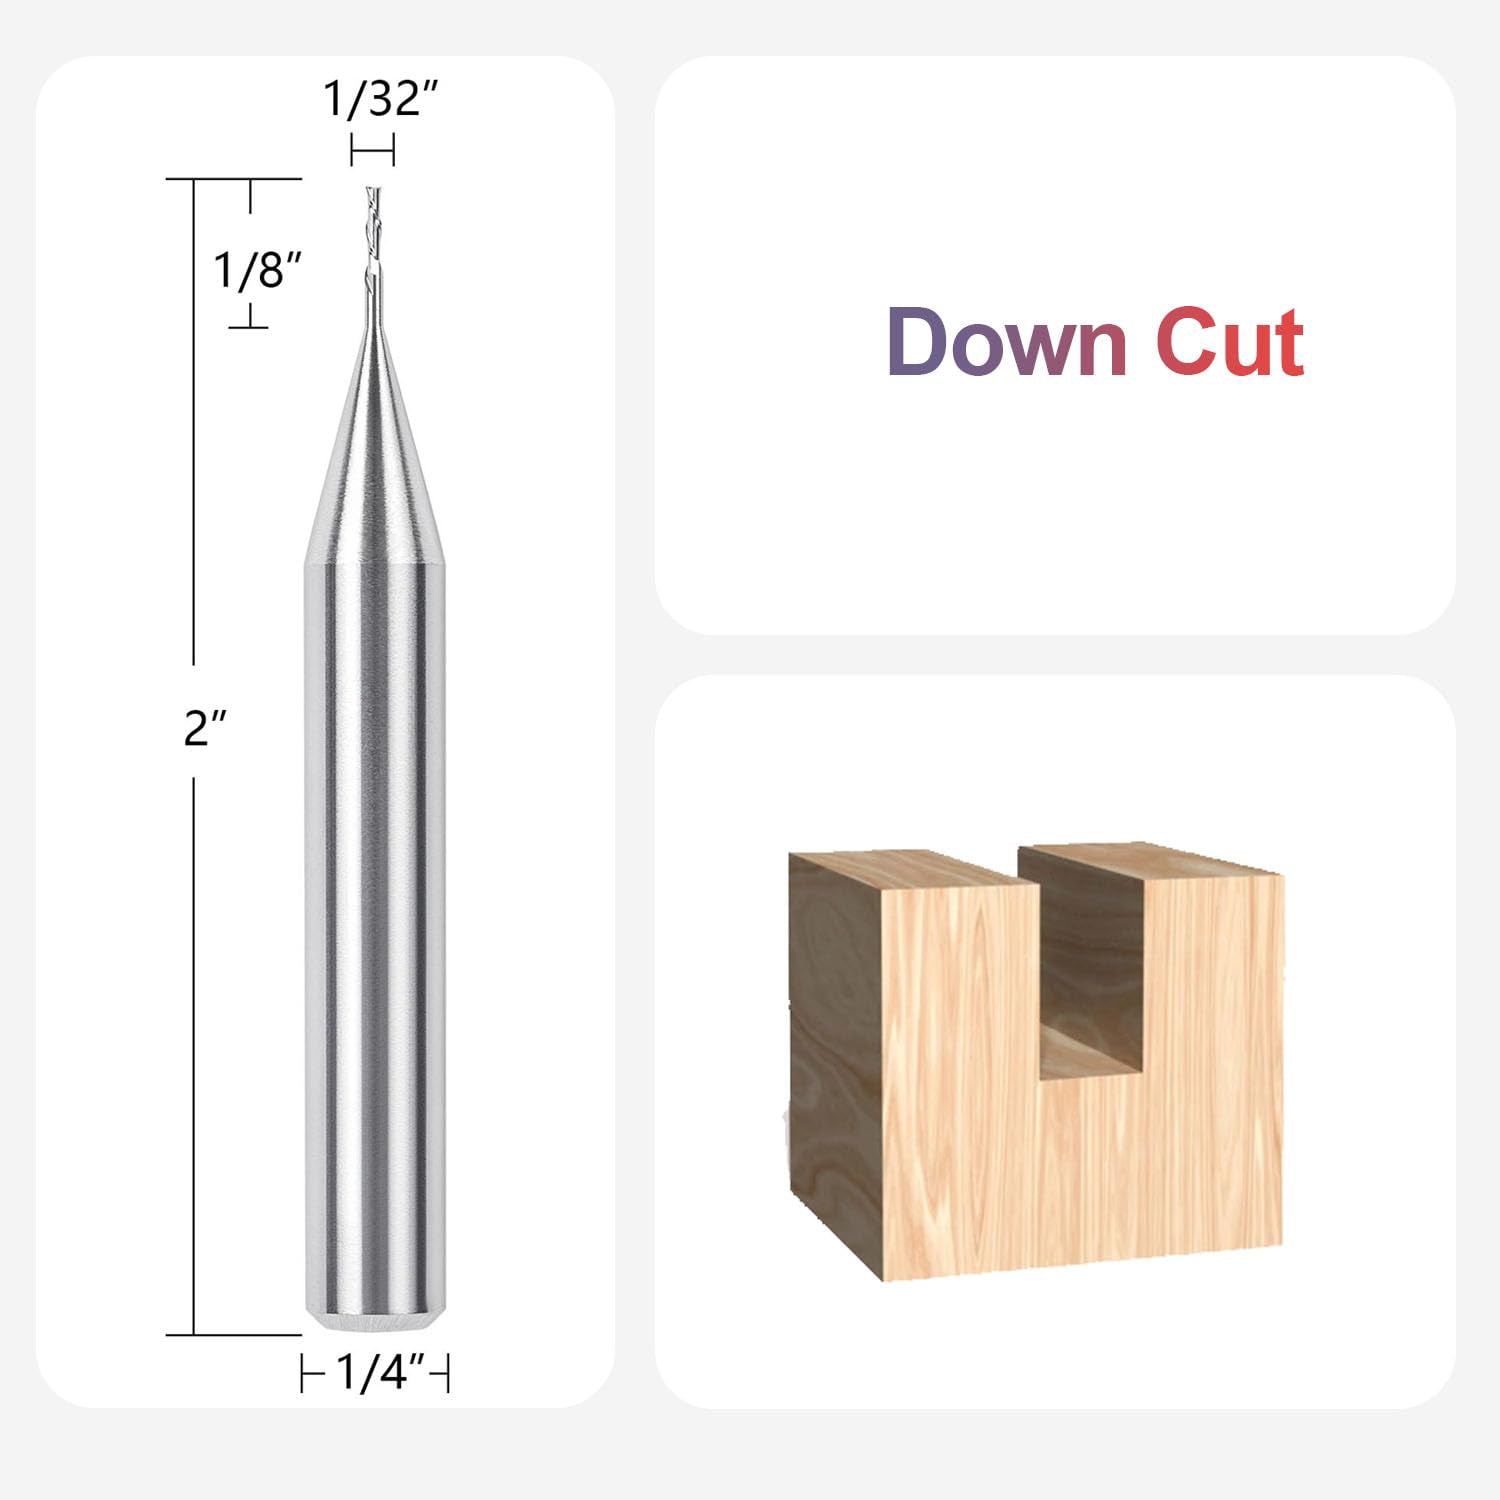 SpeTool Small 1/32 DIA Downcut End Mill 1/4 Shank Carbide Router Bit